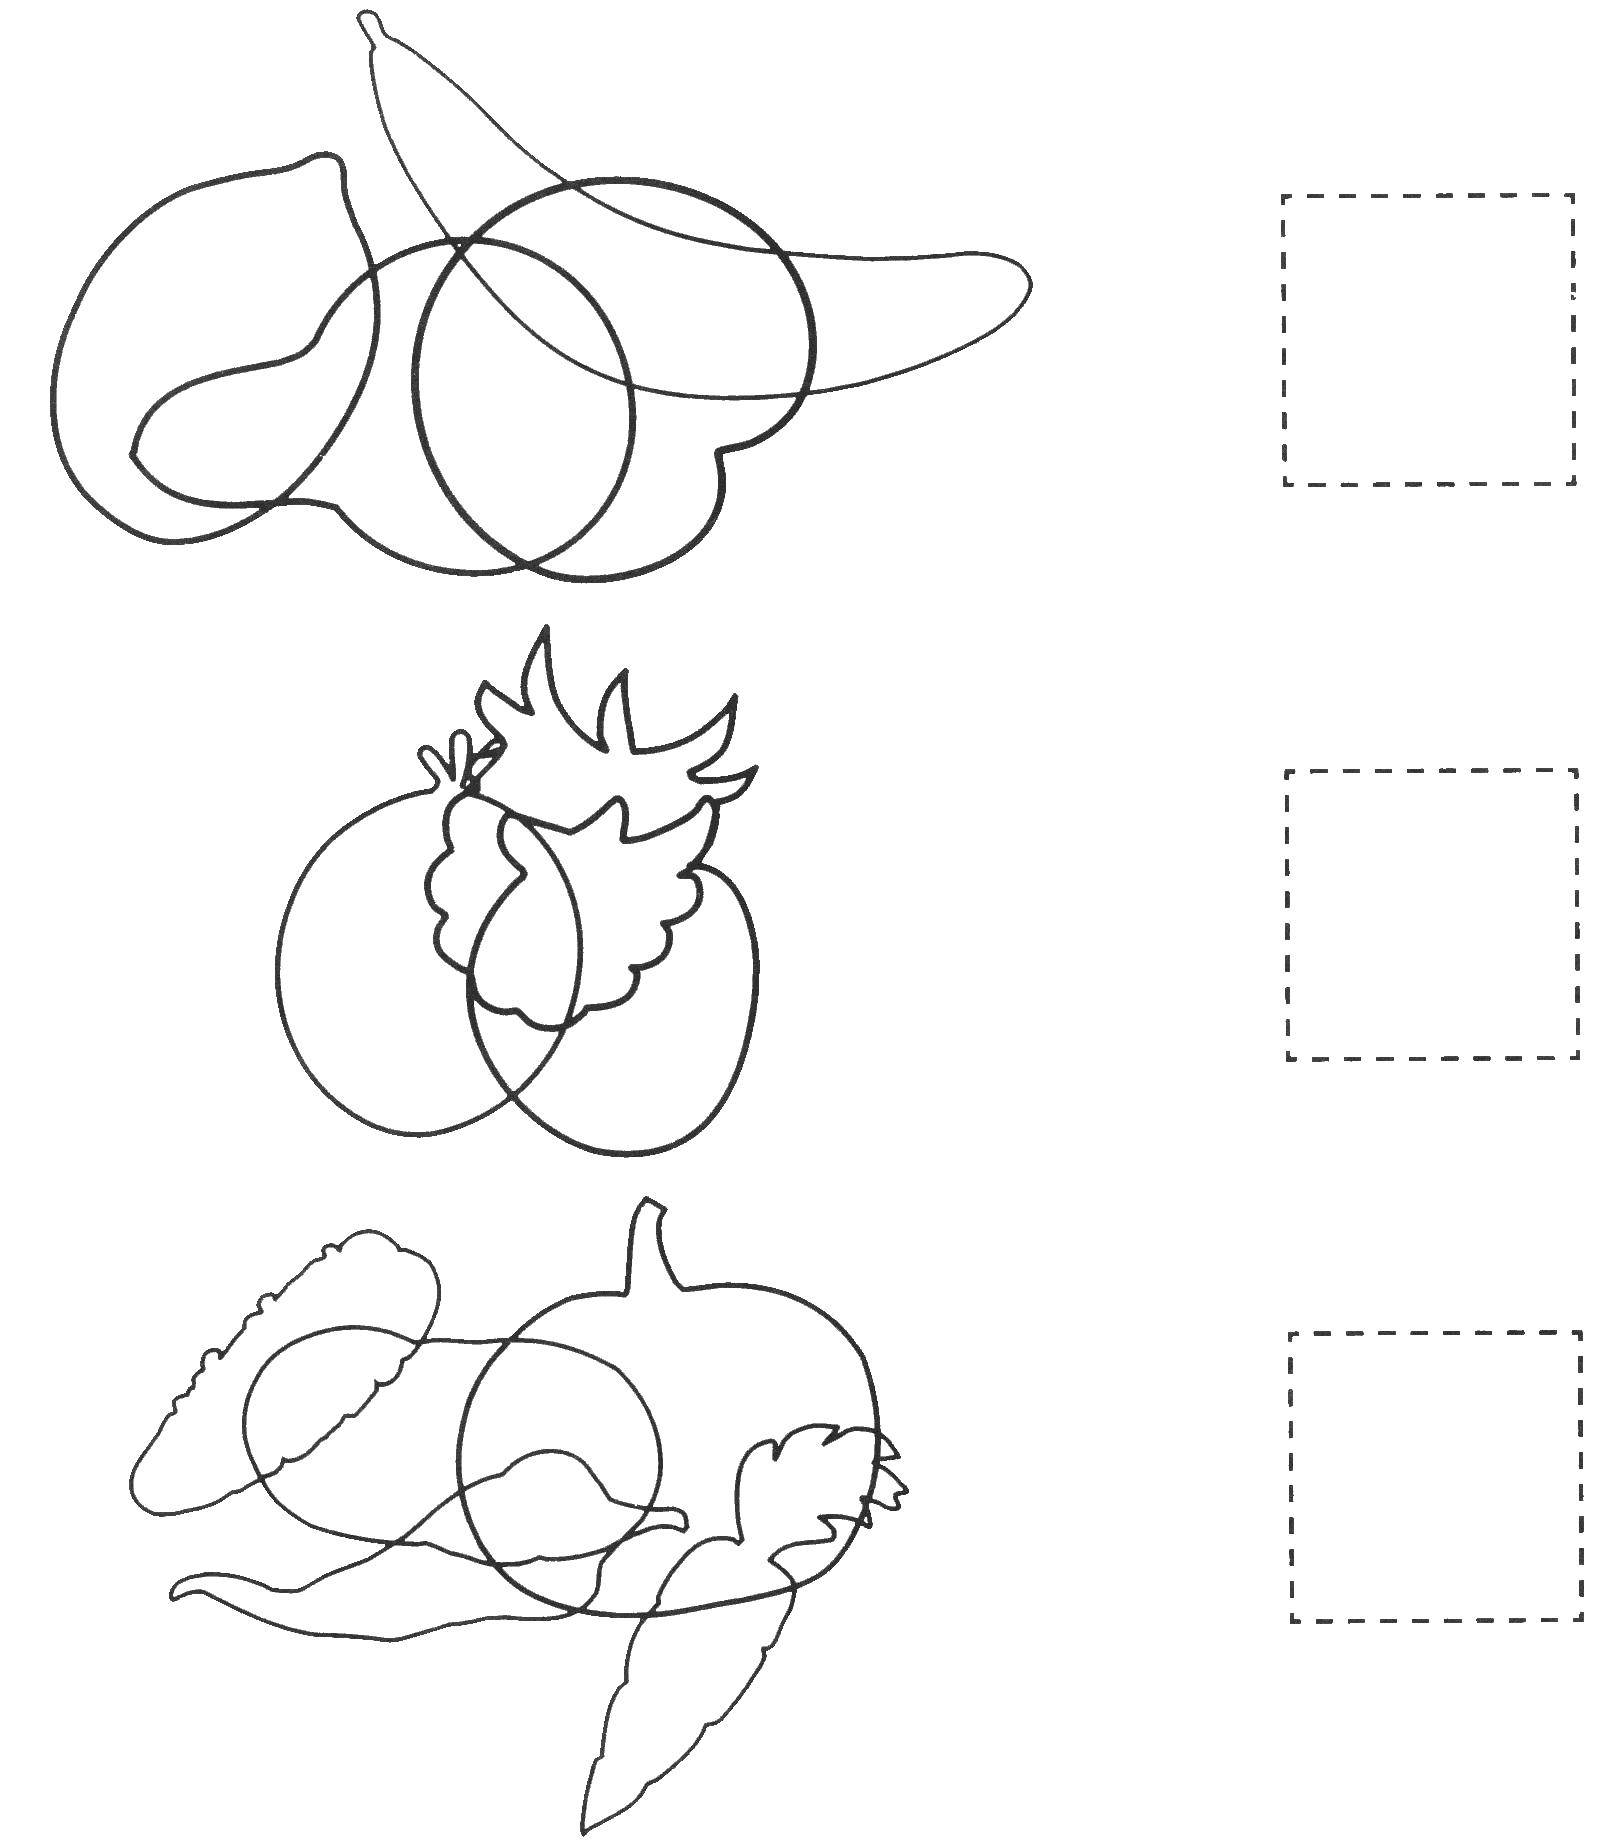 Coloring The contours of the vegetables. Category autumn. Tags:  vegetables, fruits.